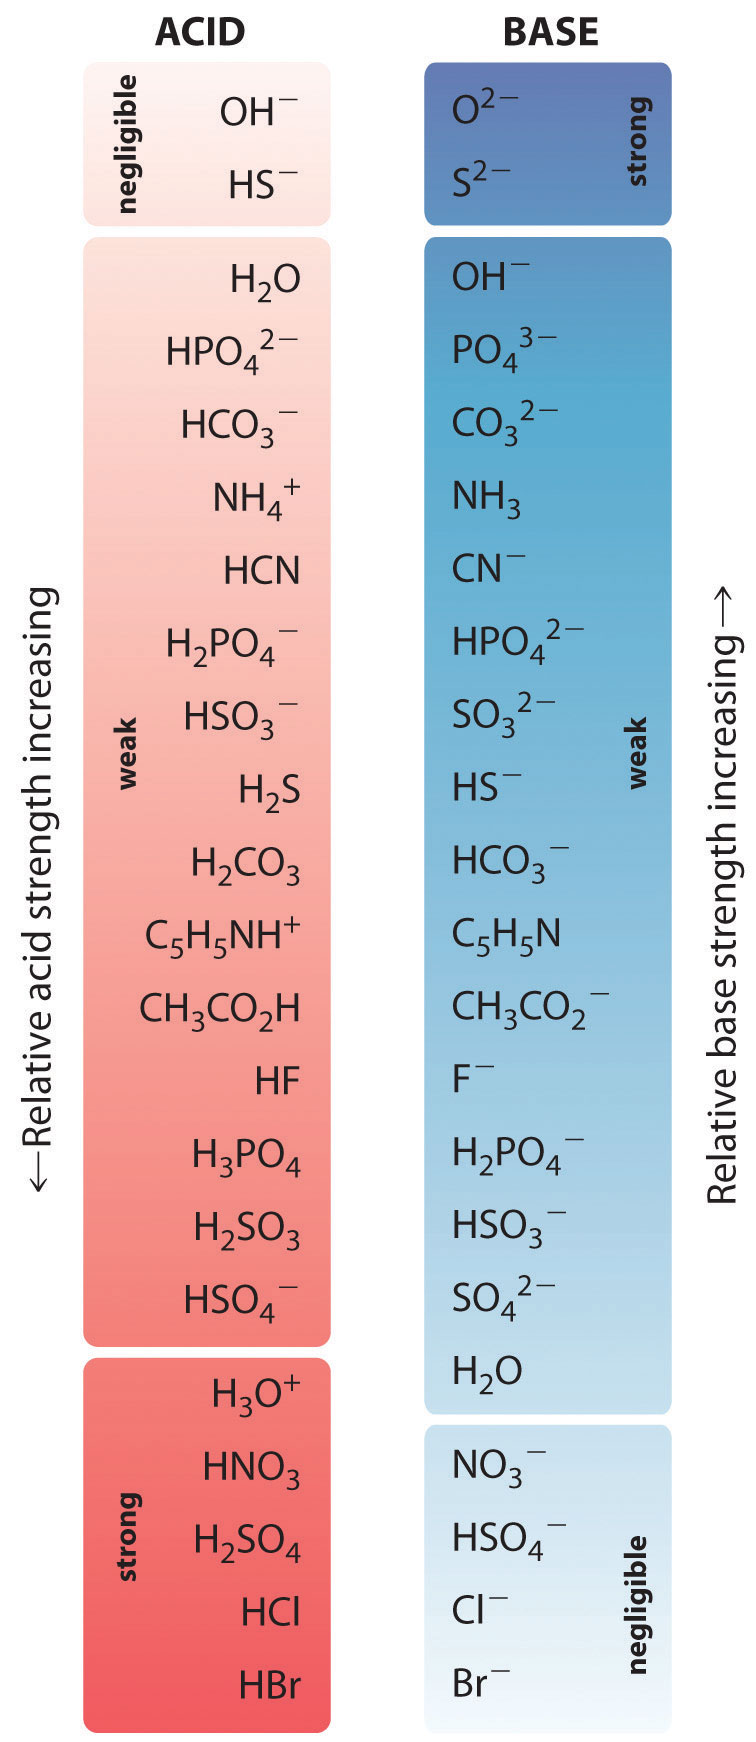 Strong acids are H3O plus, HNO3, H2SO4, HCl, and HBr. Negligible acids are HS minus and OH minus. Stron bases are O negative 2, S negative 2. Negligible bases are NO3 minus, HSO4 minus, Cl minus, and Br minus. 